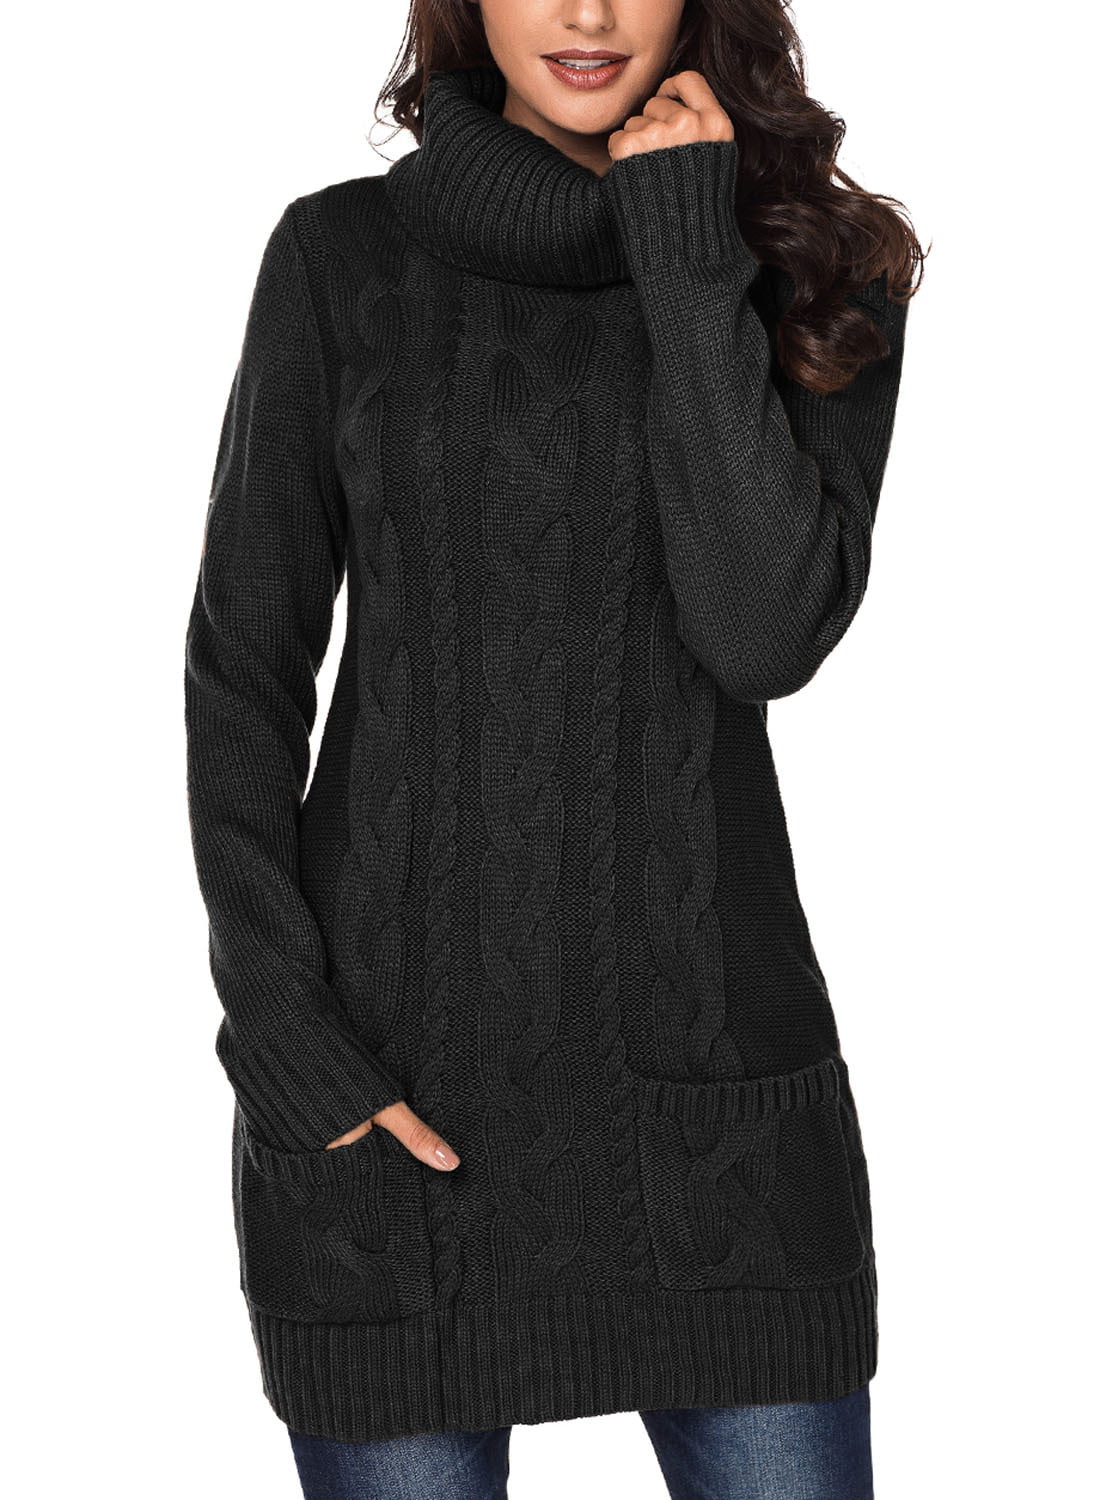 New Women Ladies Roll Polo Neck Cable Knitted Long Sleeve Jumper Sweater Dress 